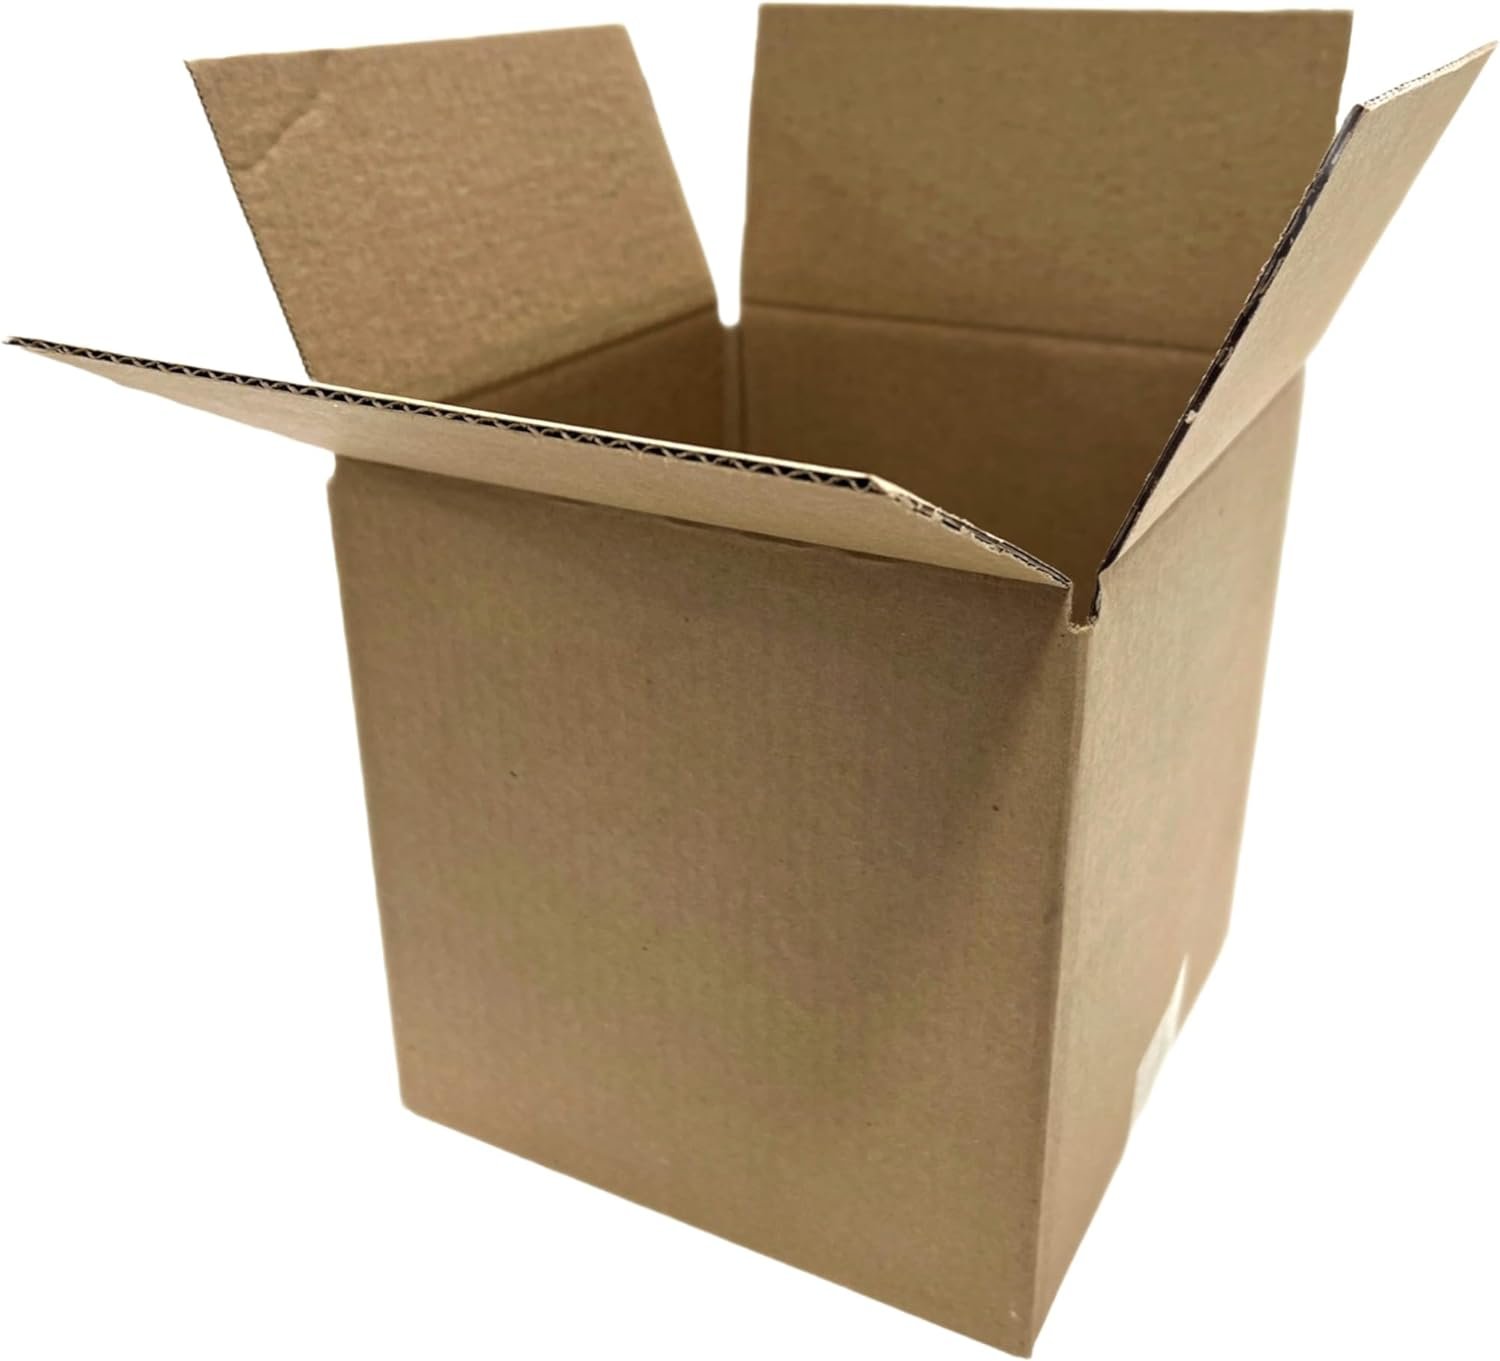 50 6x6x5 Cardboard Paper Boxes Mailing Packing Shipping Box Corrugated Carton